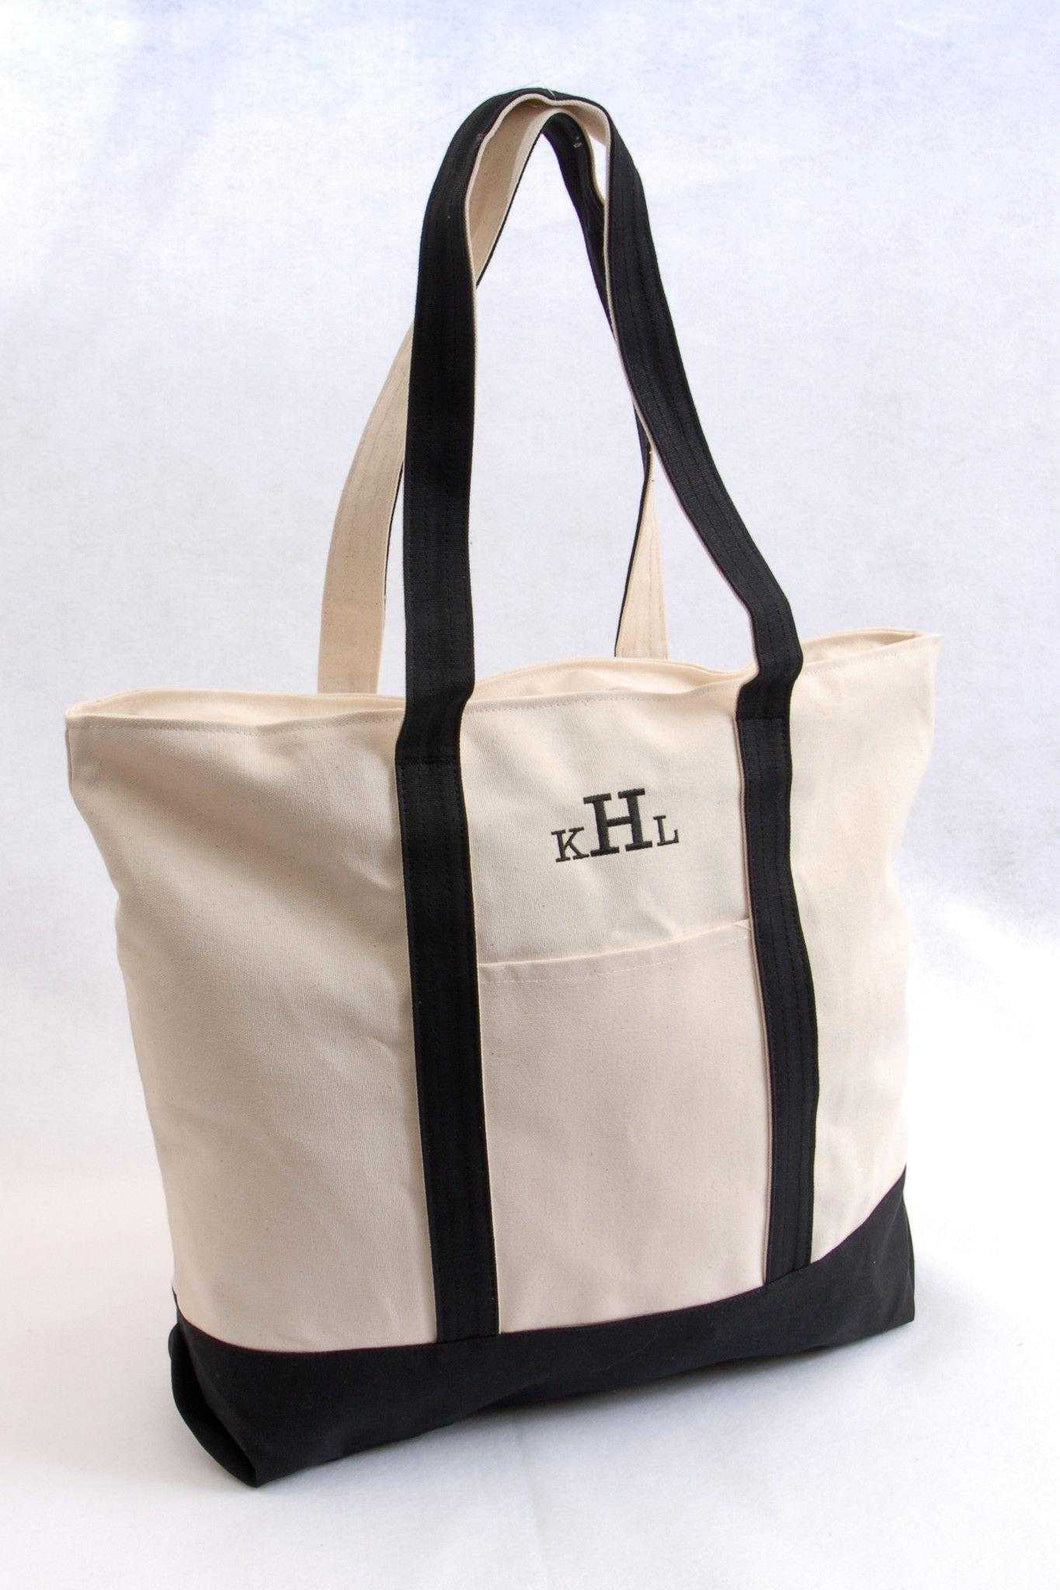 Personalized Tote Bags - Beach Bag - Gifts for Her | JDS